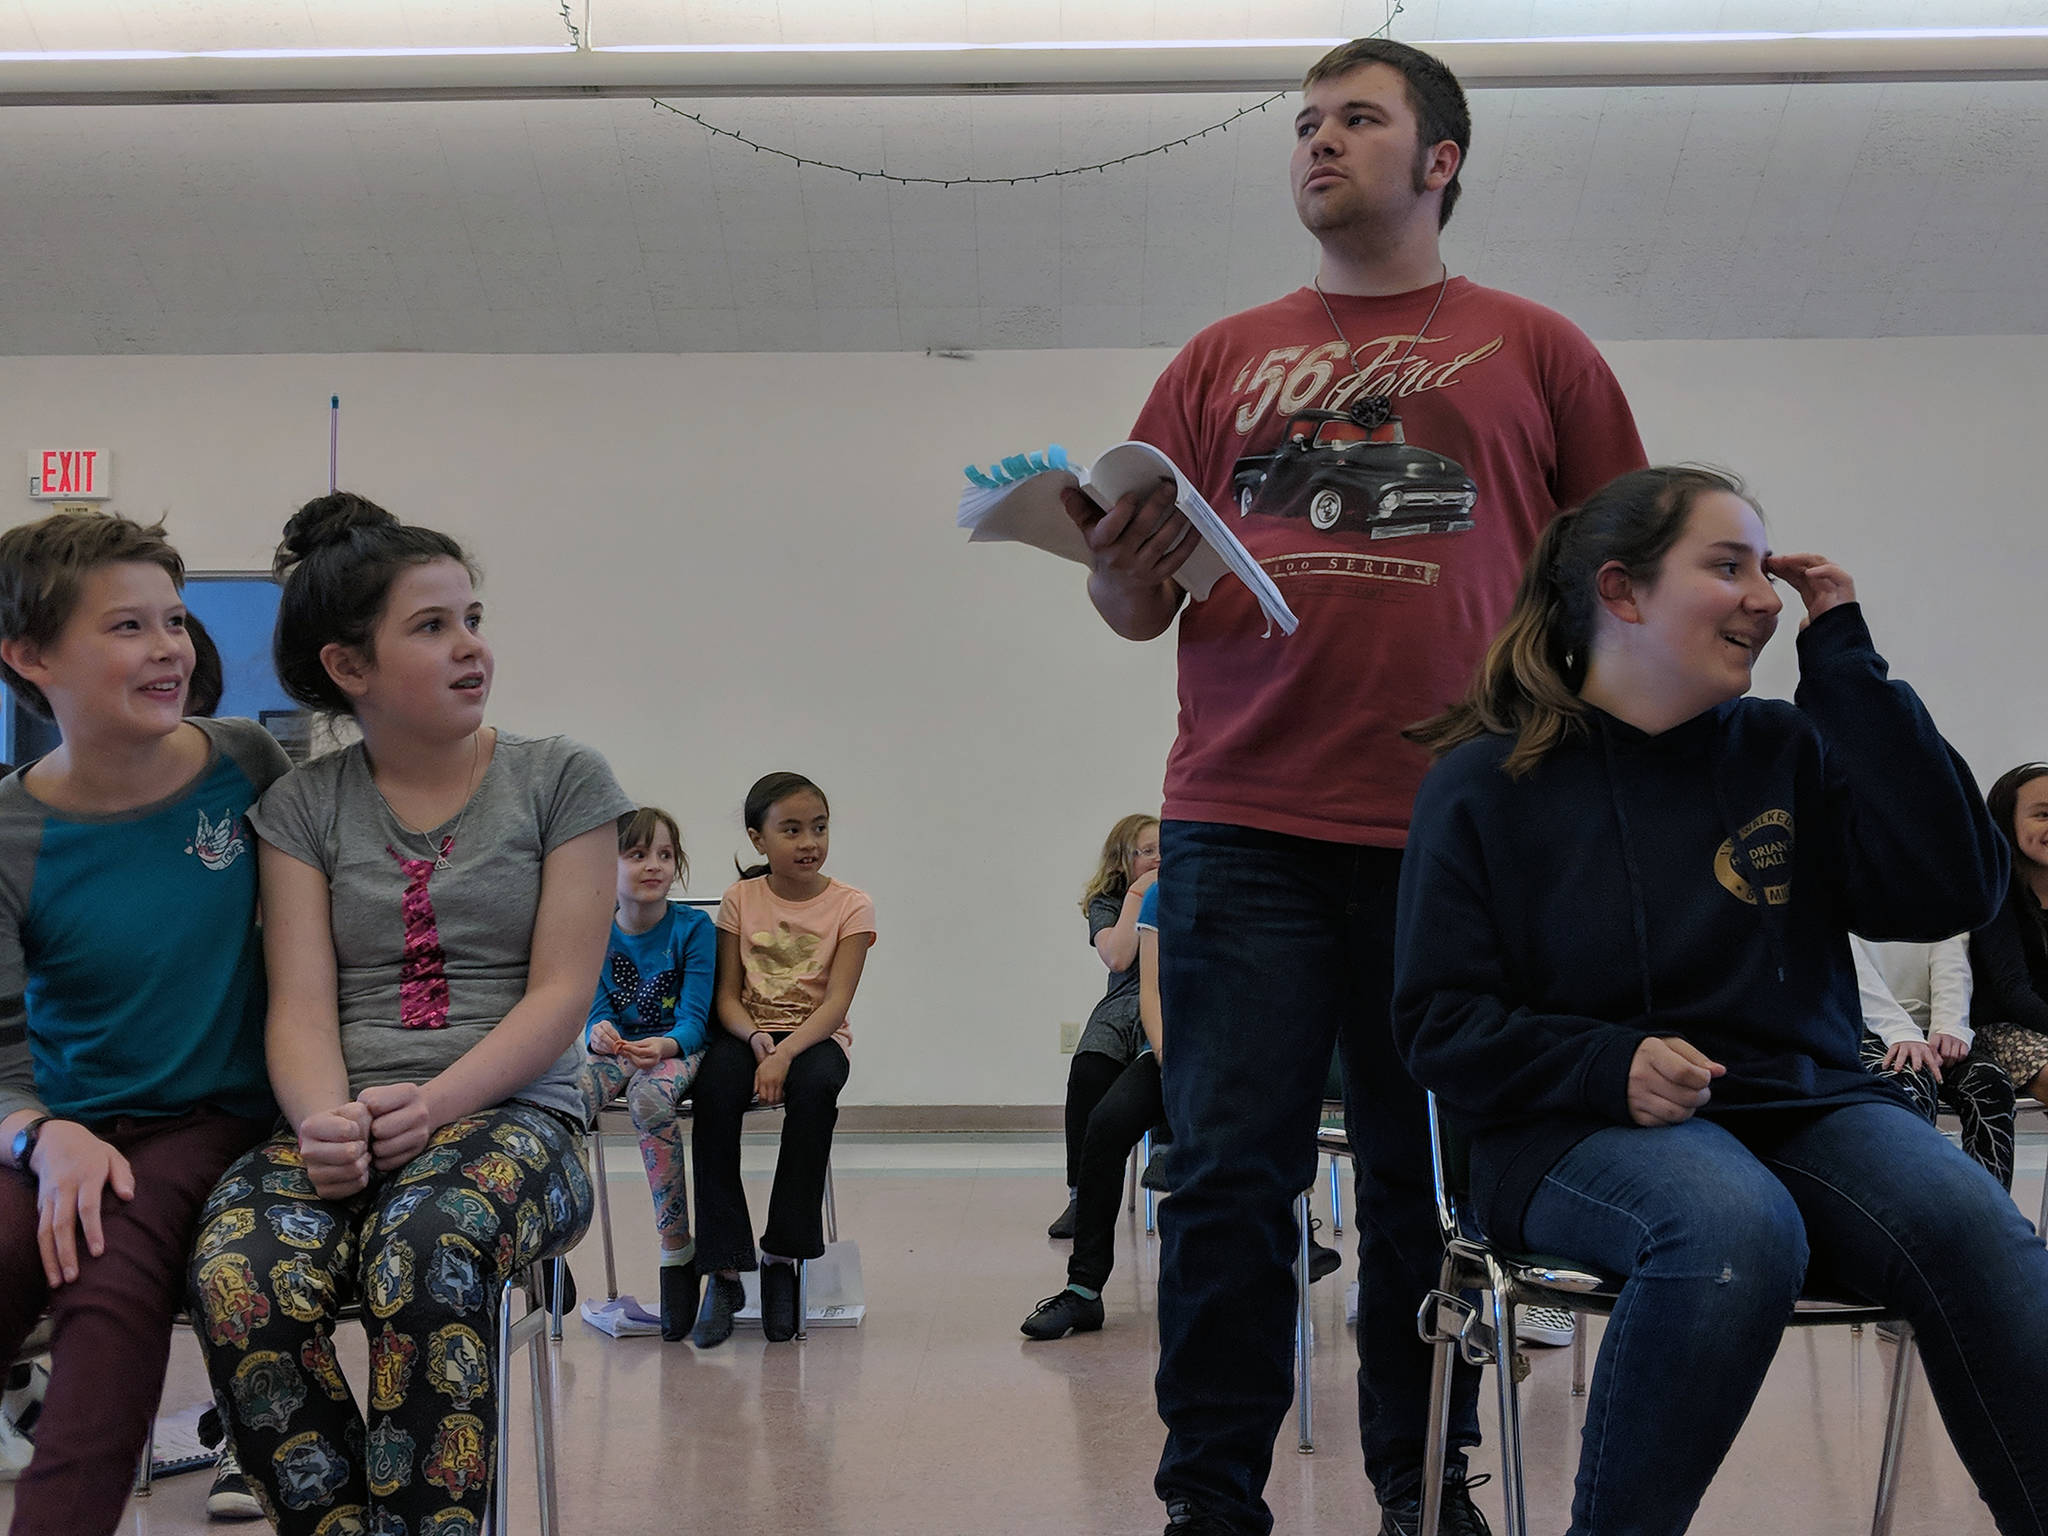 Reagan Mitchell (far right), portraying Matilda stifles laughter in the stern presence of Jared Vance’s Miss Trunchbull, while classmates (from left to right) Dannan Mills, Dori Germain, Adina Alper and Kaia Mangaccat look on during a rehearsal of “Matilda,” a musical production to be put on by Theater at Latitude 58. (Ben Hohenstatt | Capital City Weekly)